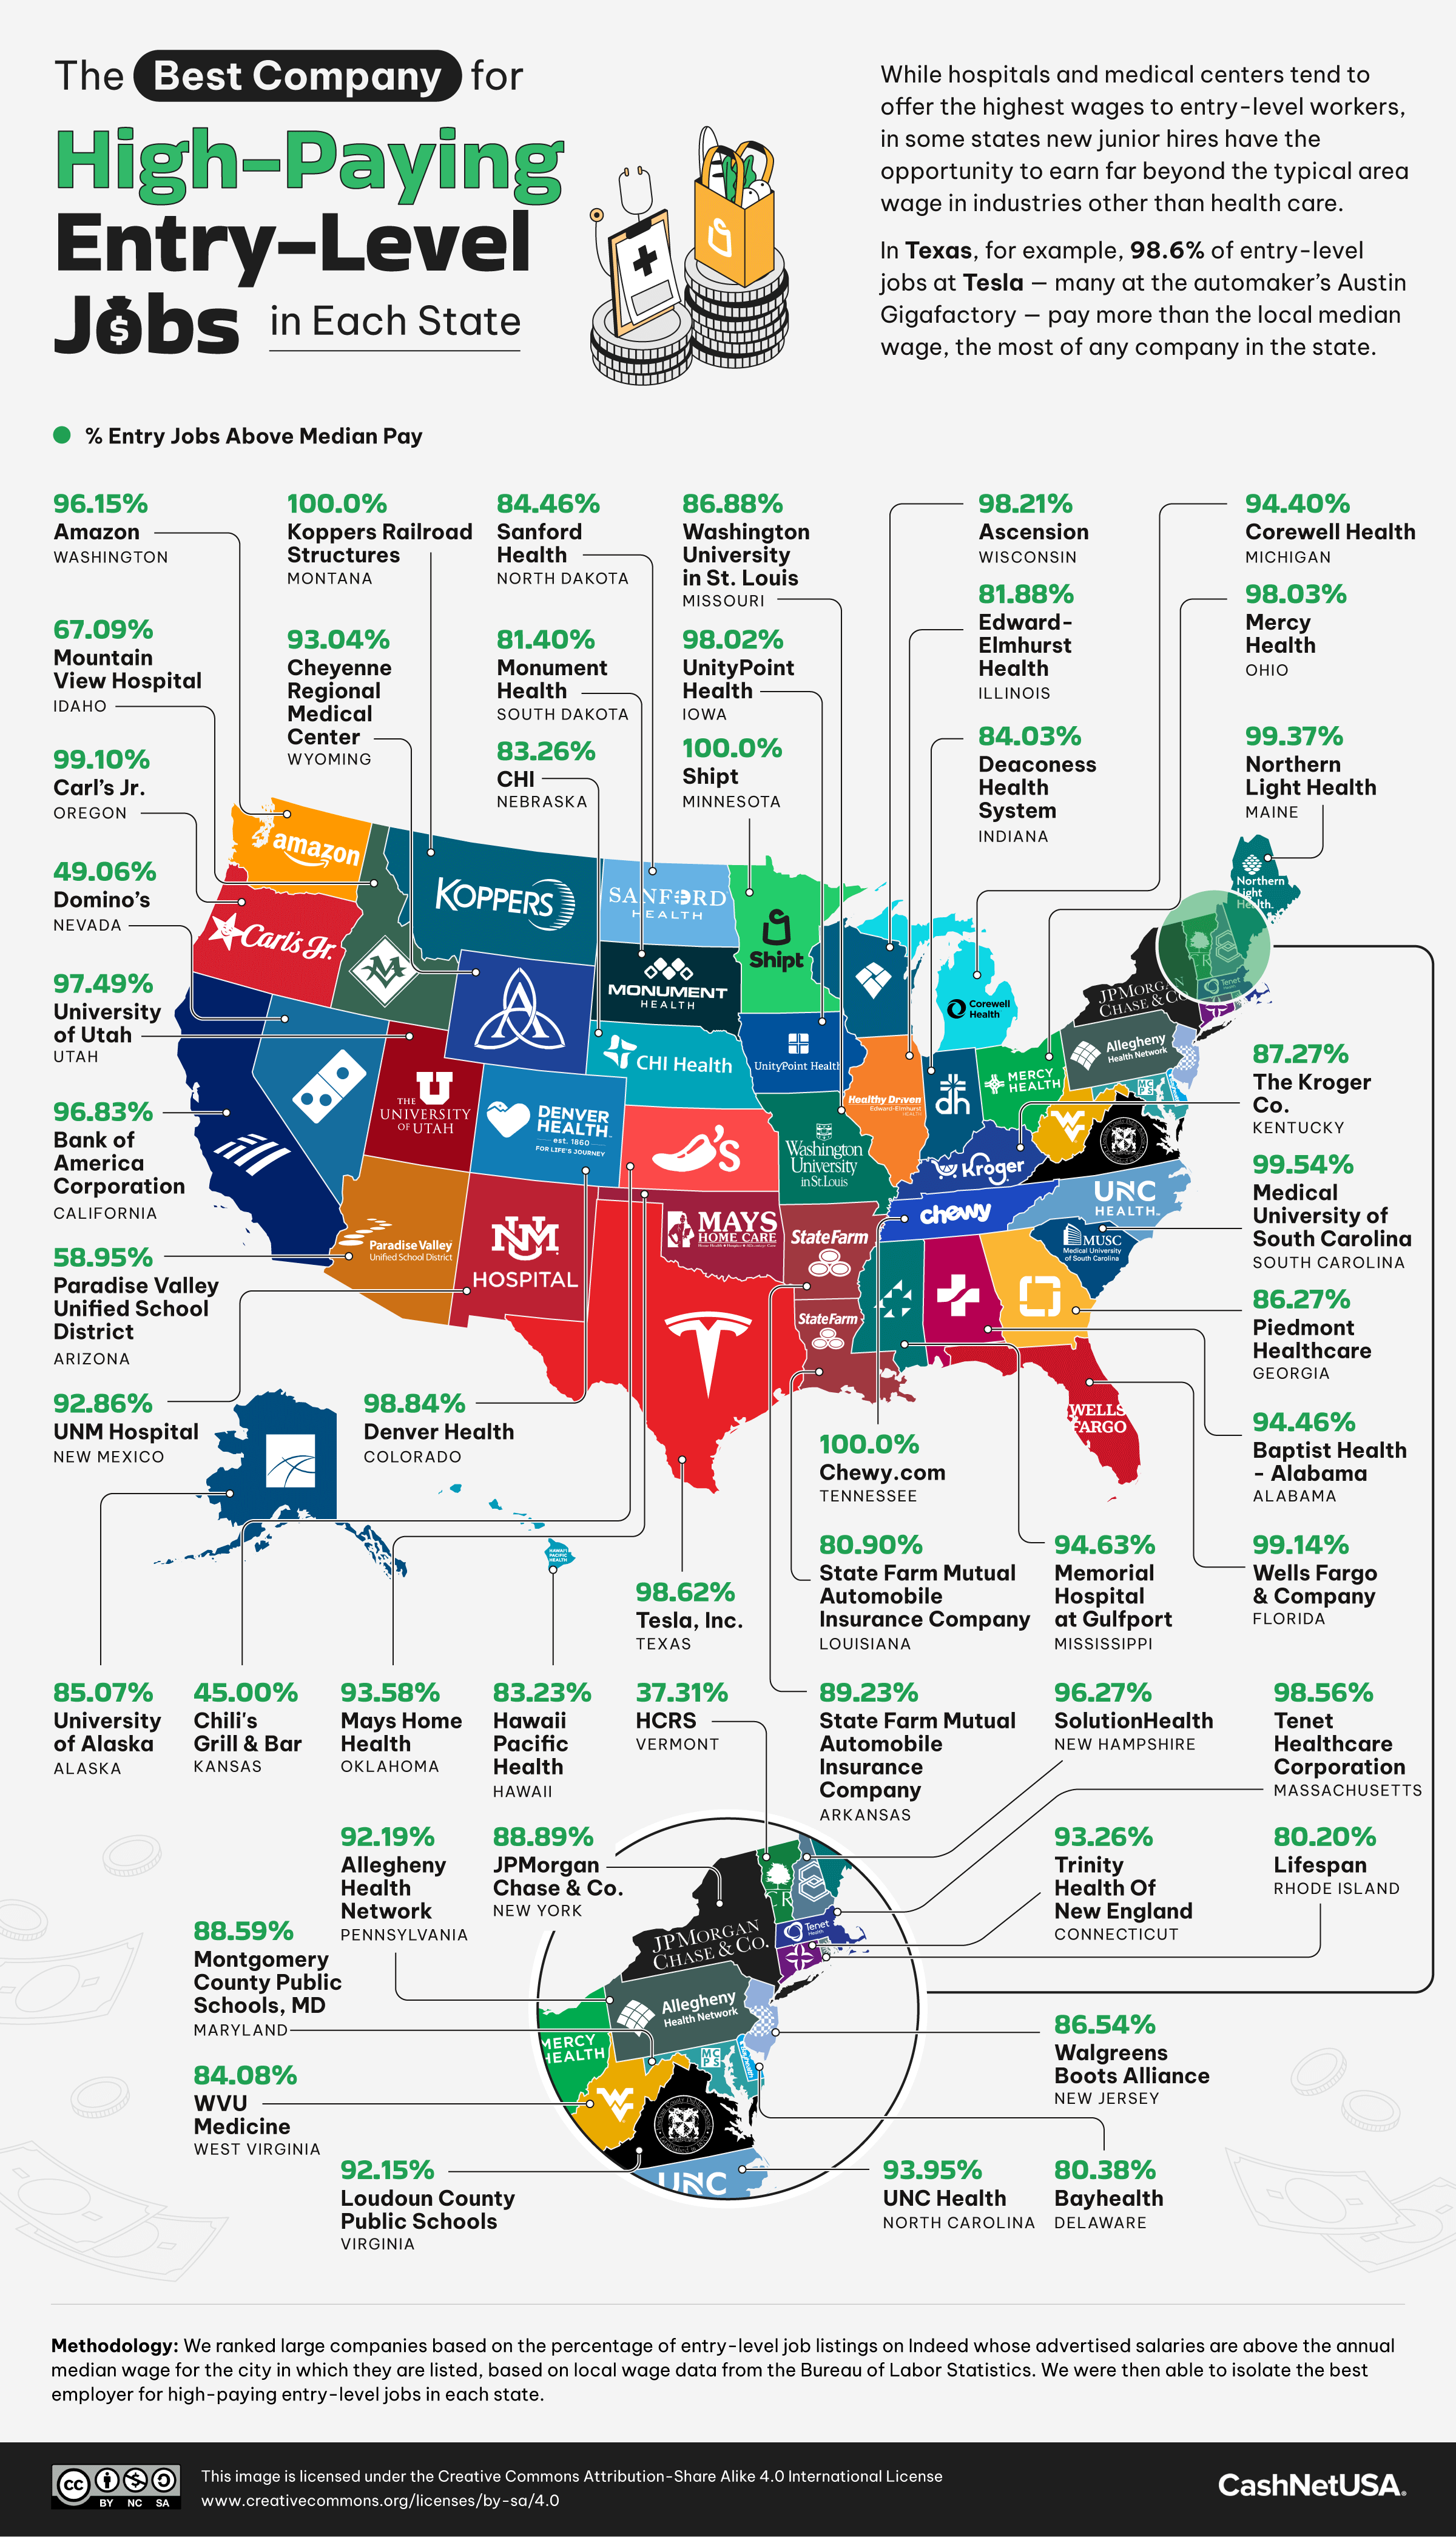 U.S. map showing the company in each state with the highest paying entry level jobs